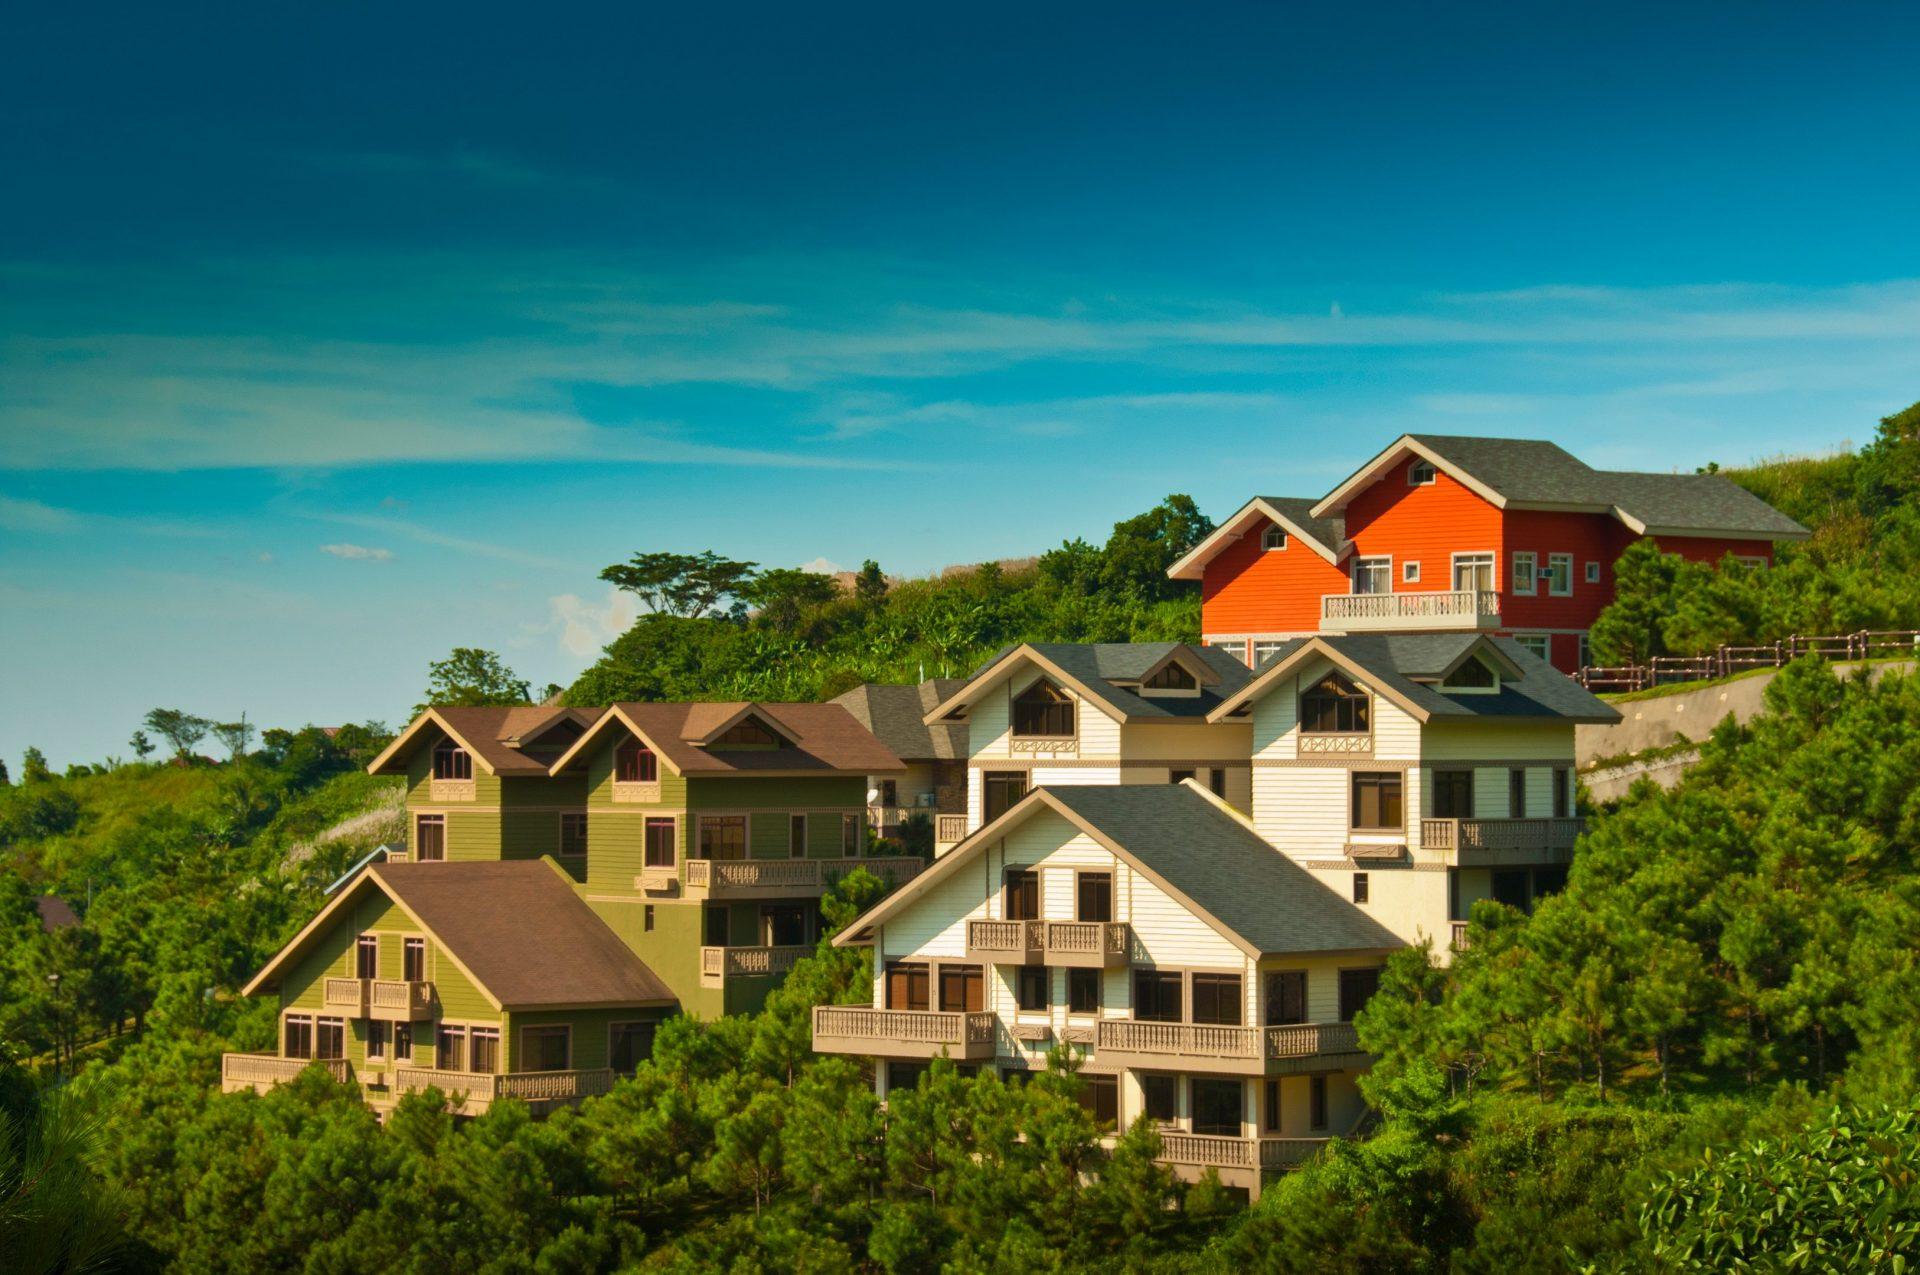 Surrounded by thousands of refreshing pine trees, Crosswinds Tagaytay is your Swiss Dreamland.